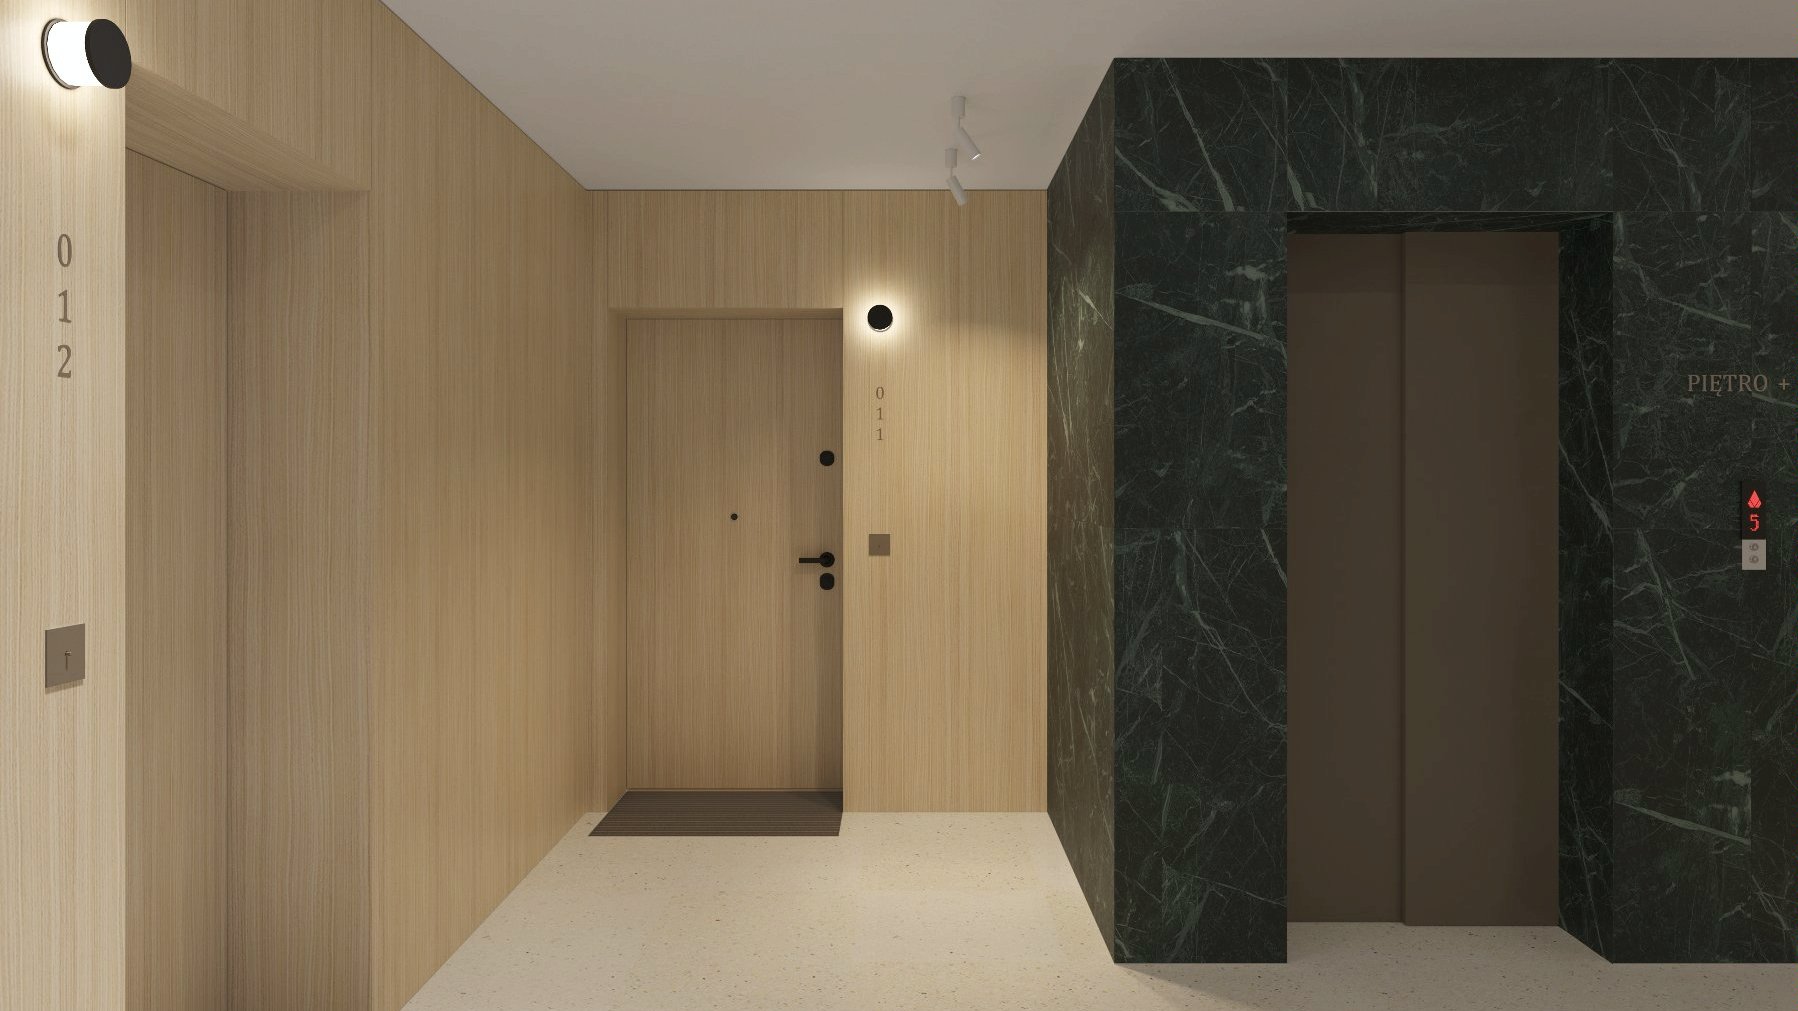 The image shows a visualisation of the lift inside the Pulaskiego 19 investment.